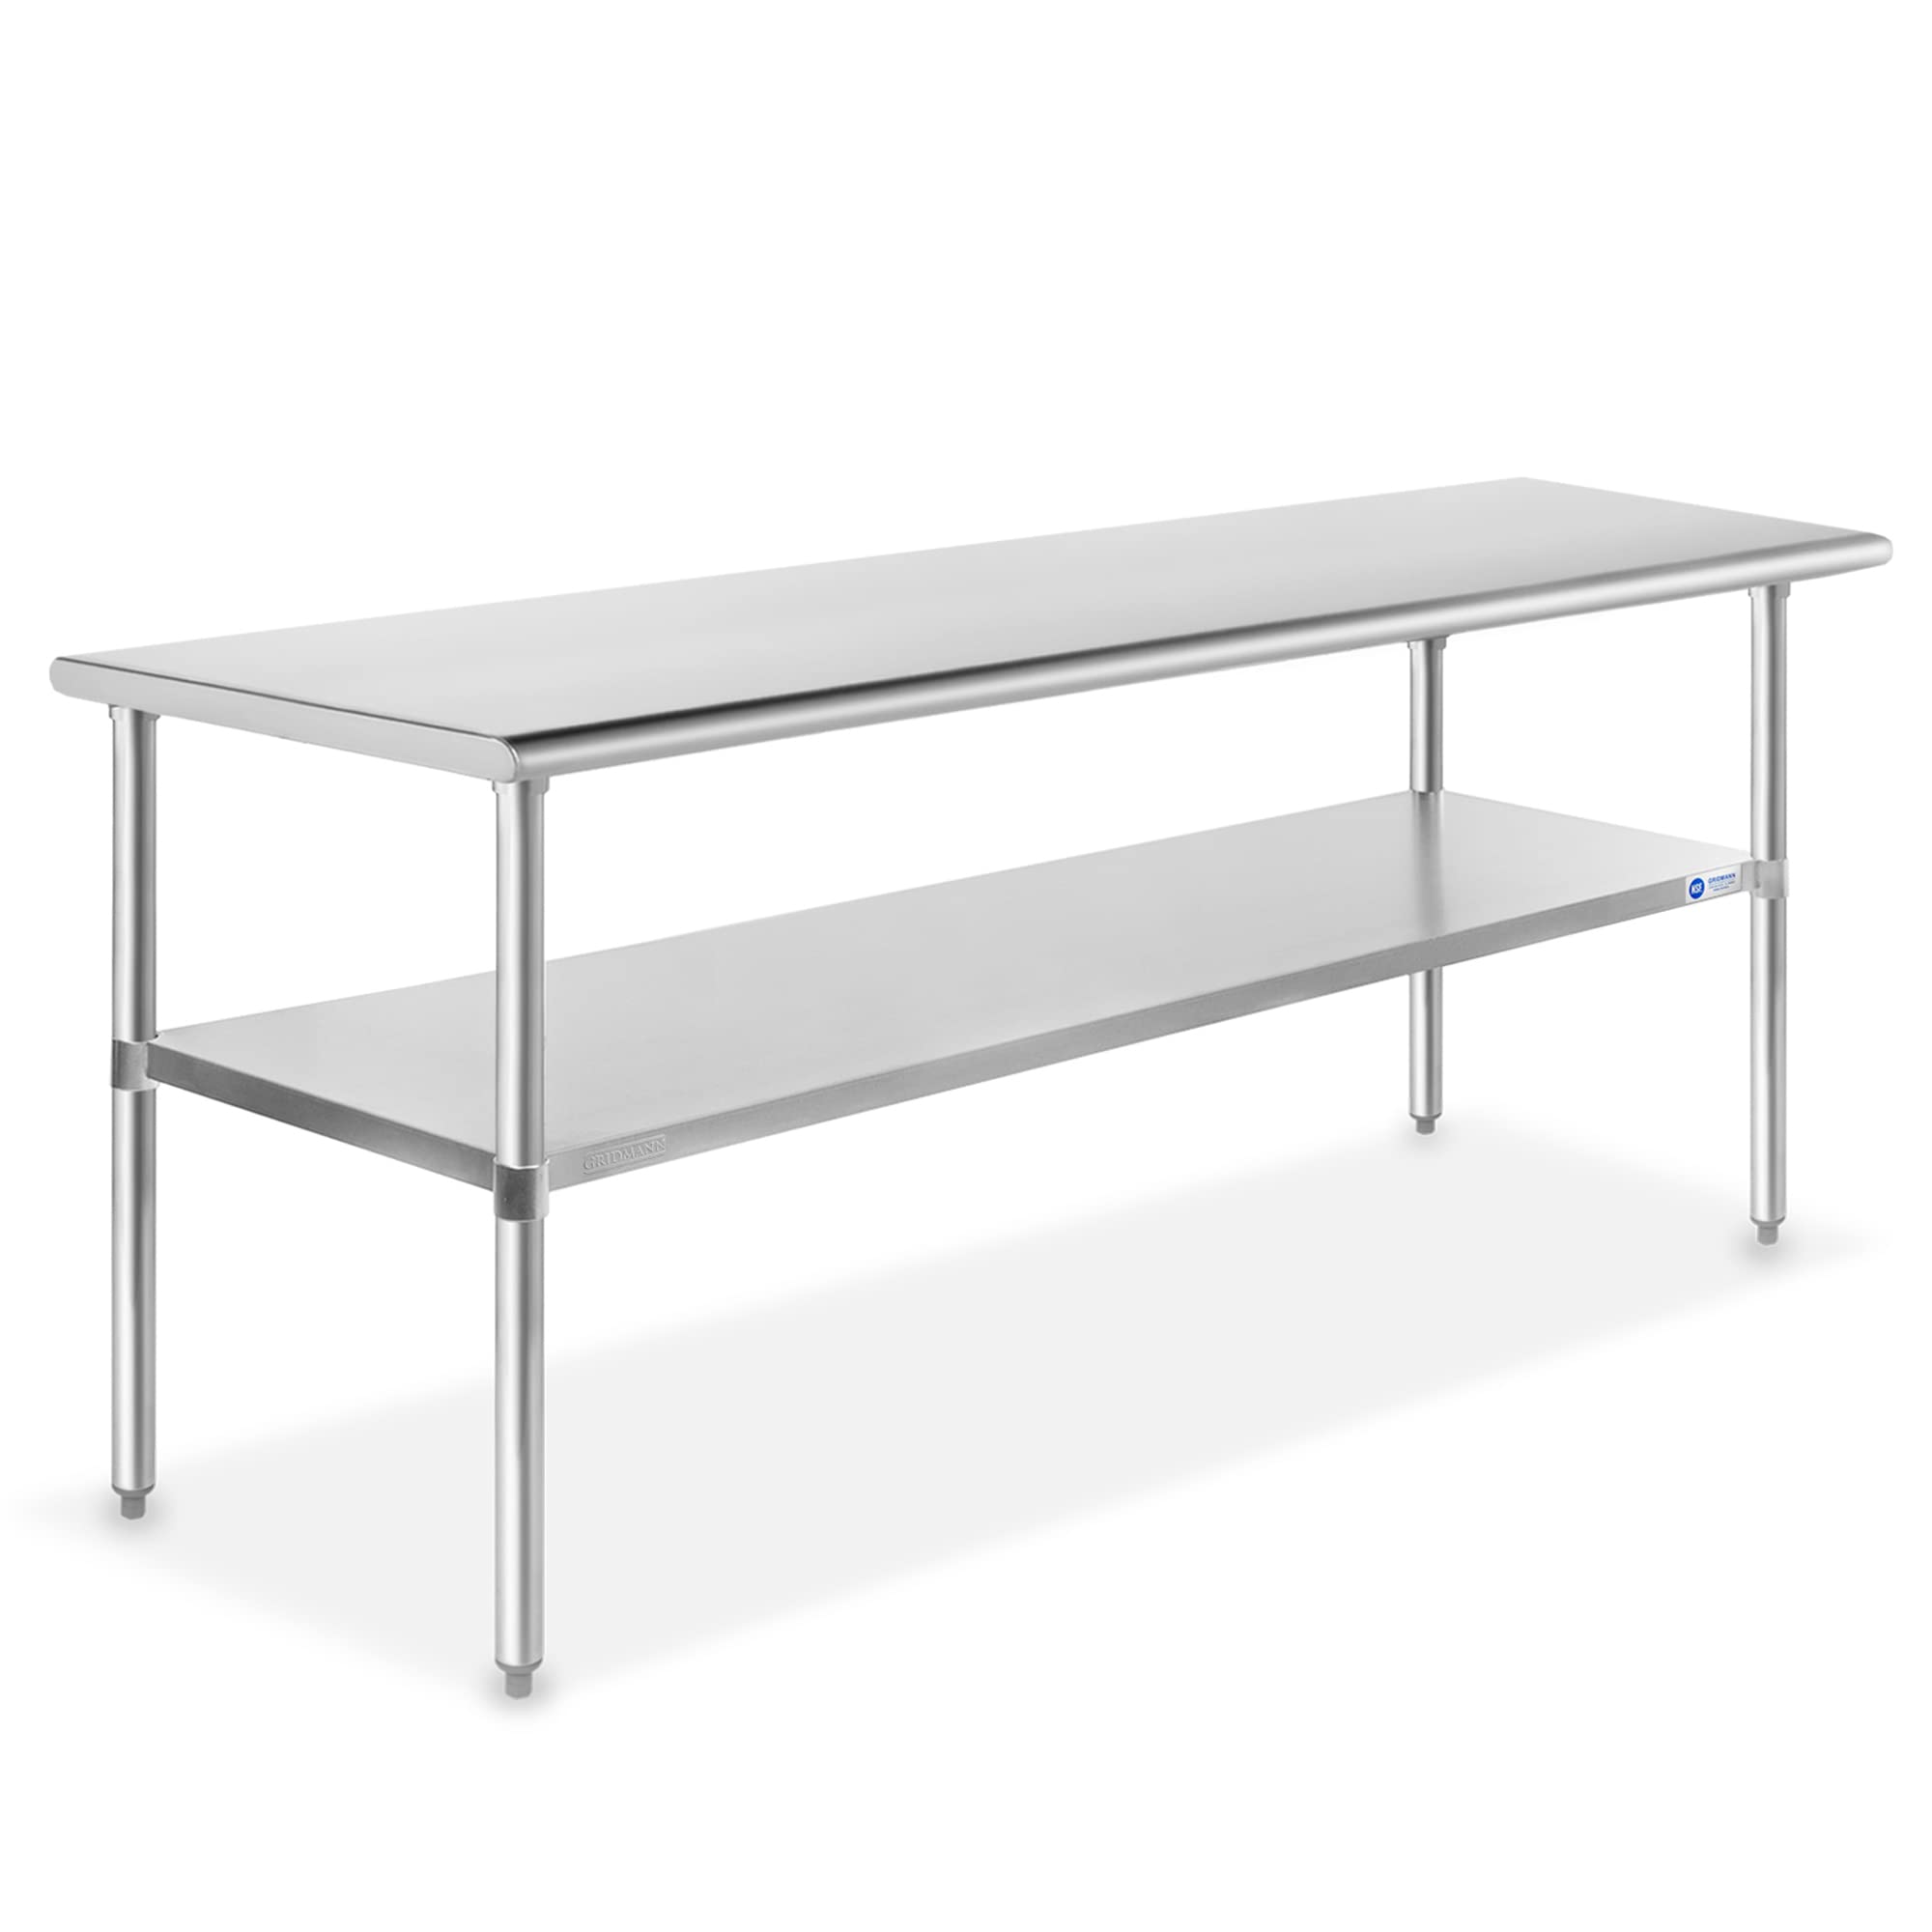 Gridmann Stainless Steel Work Table 72 x 30 Inches, NSF...